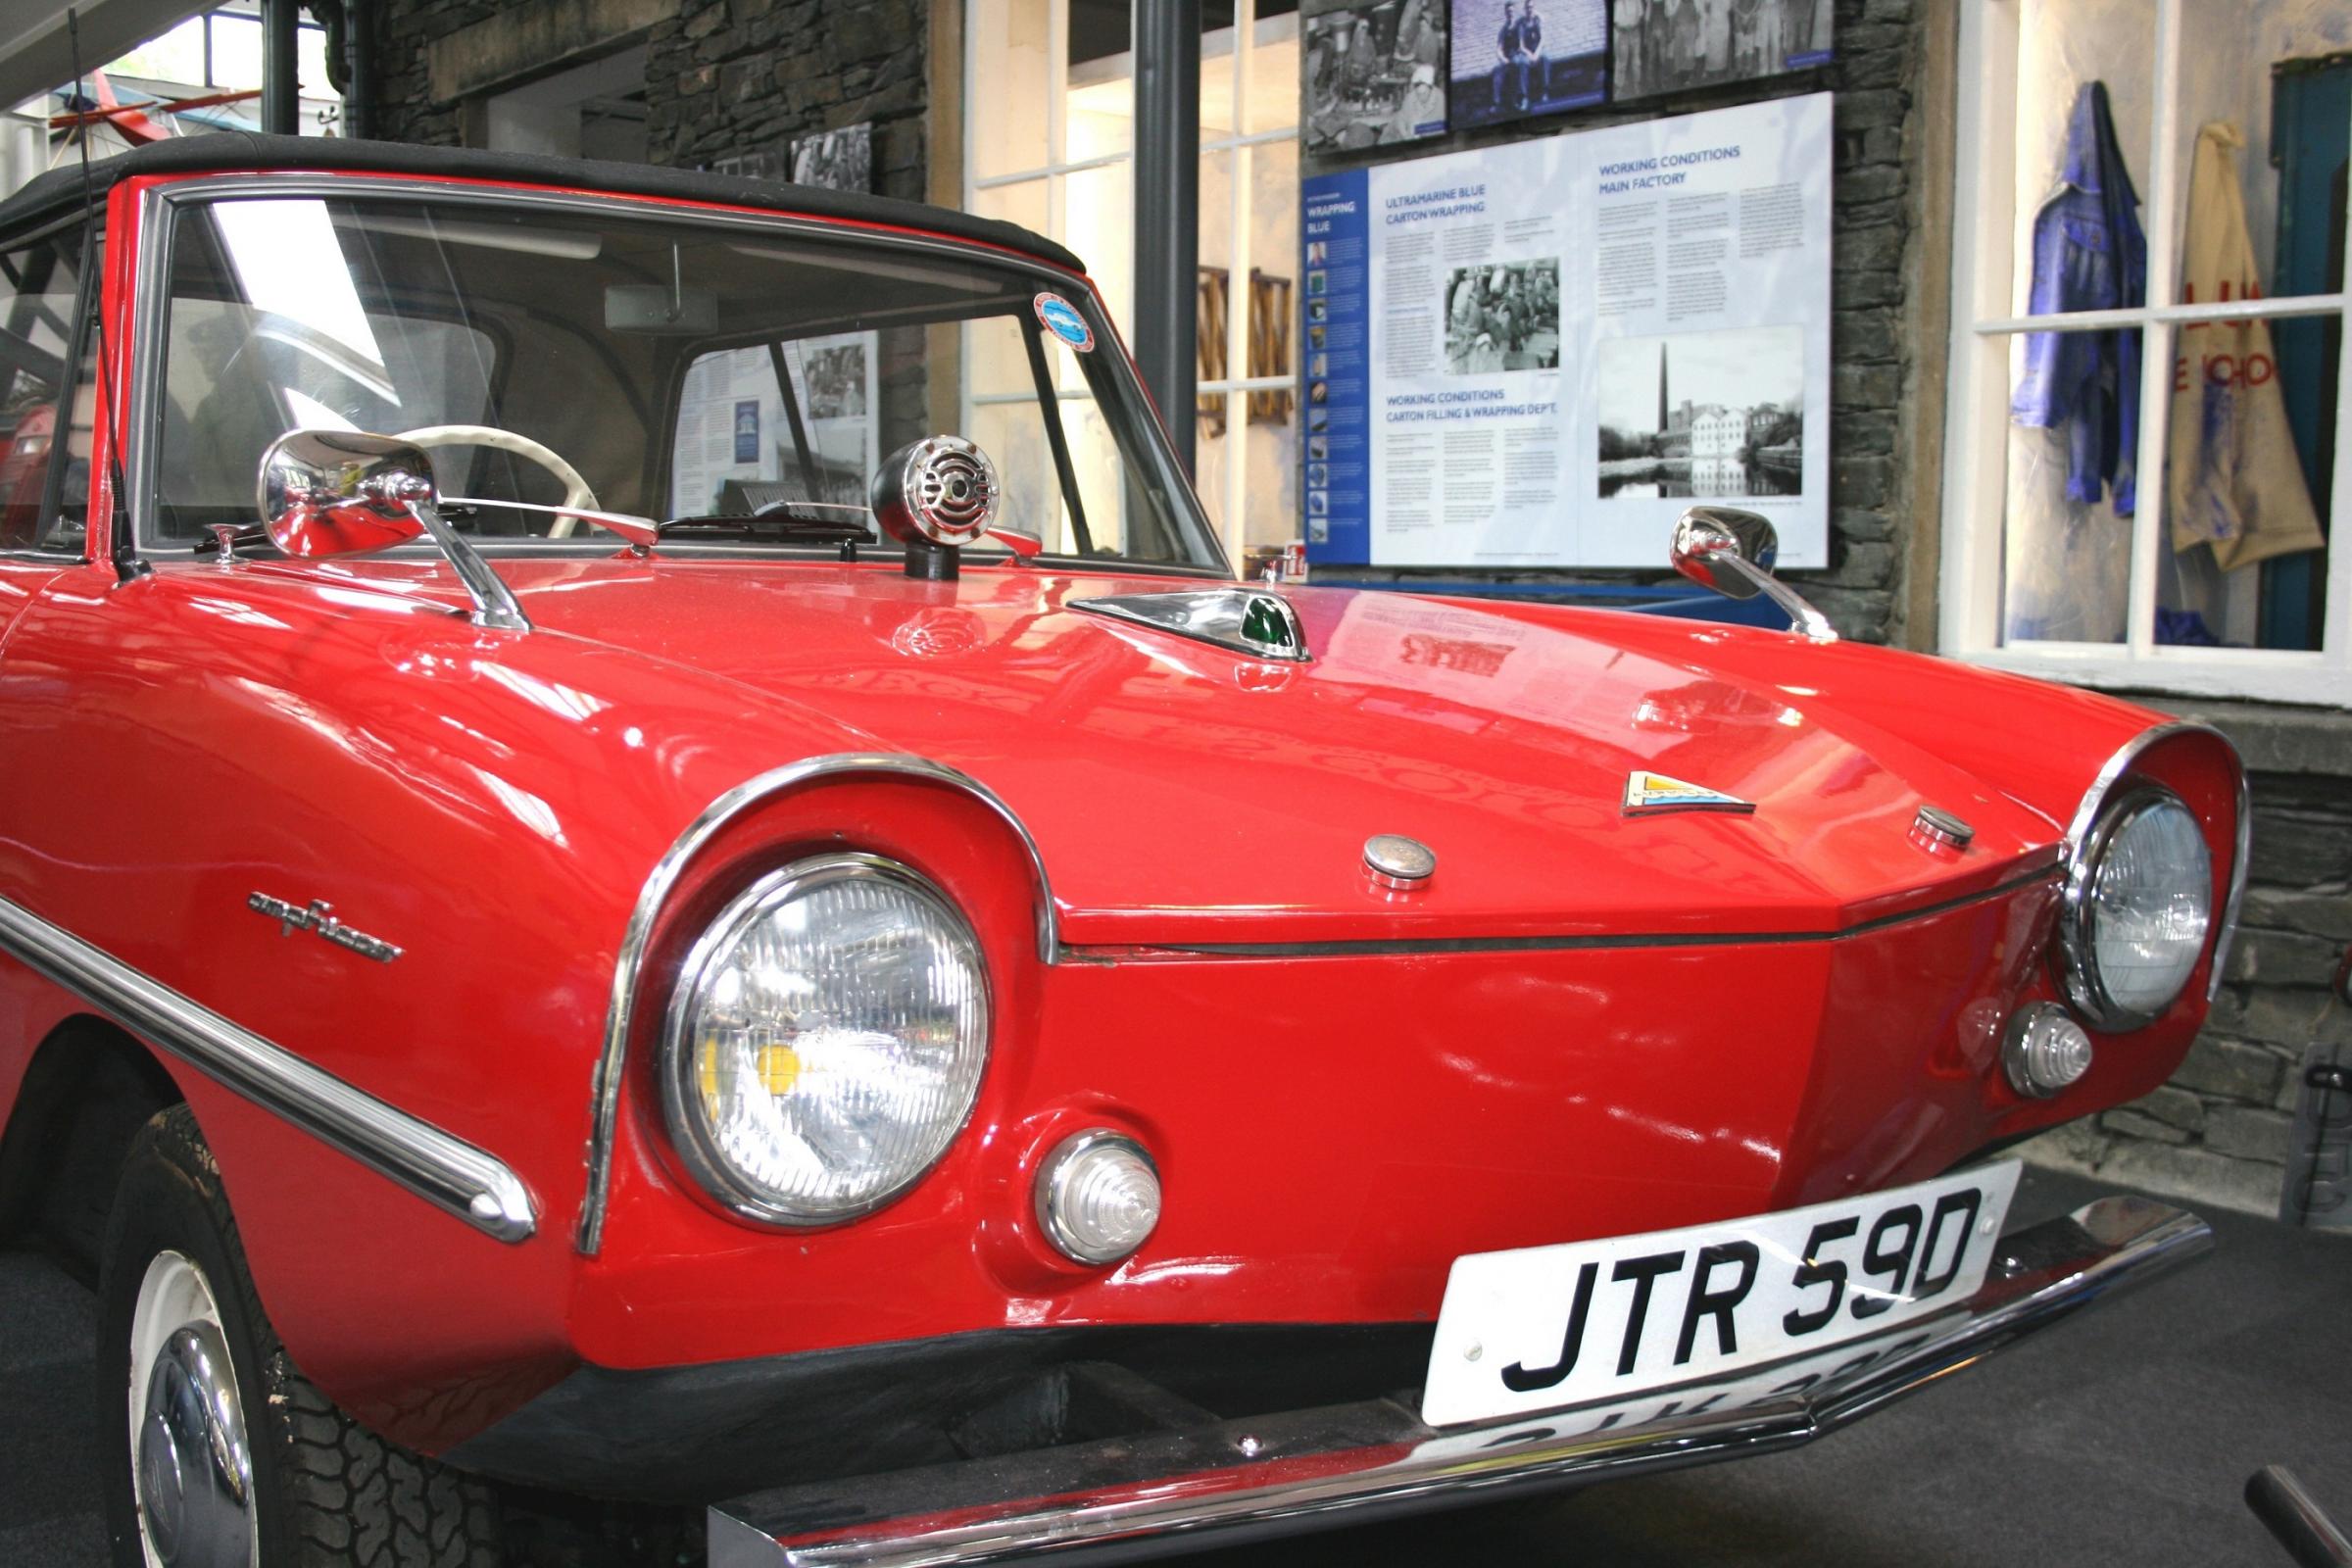 CAR: A picture of the Amphicar at the museum 